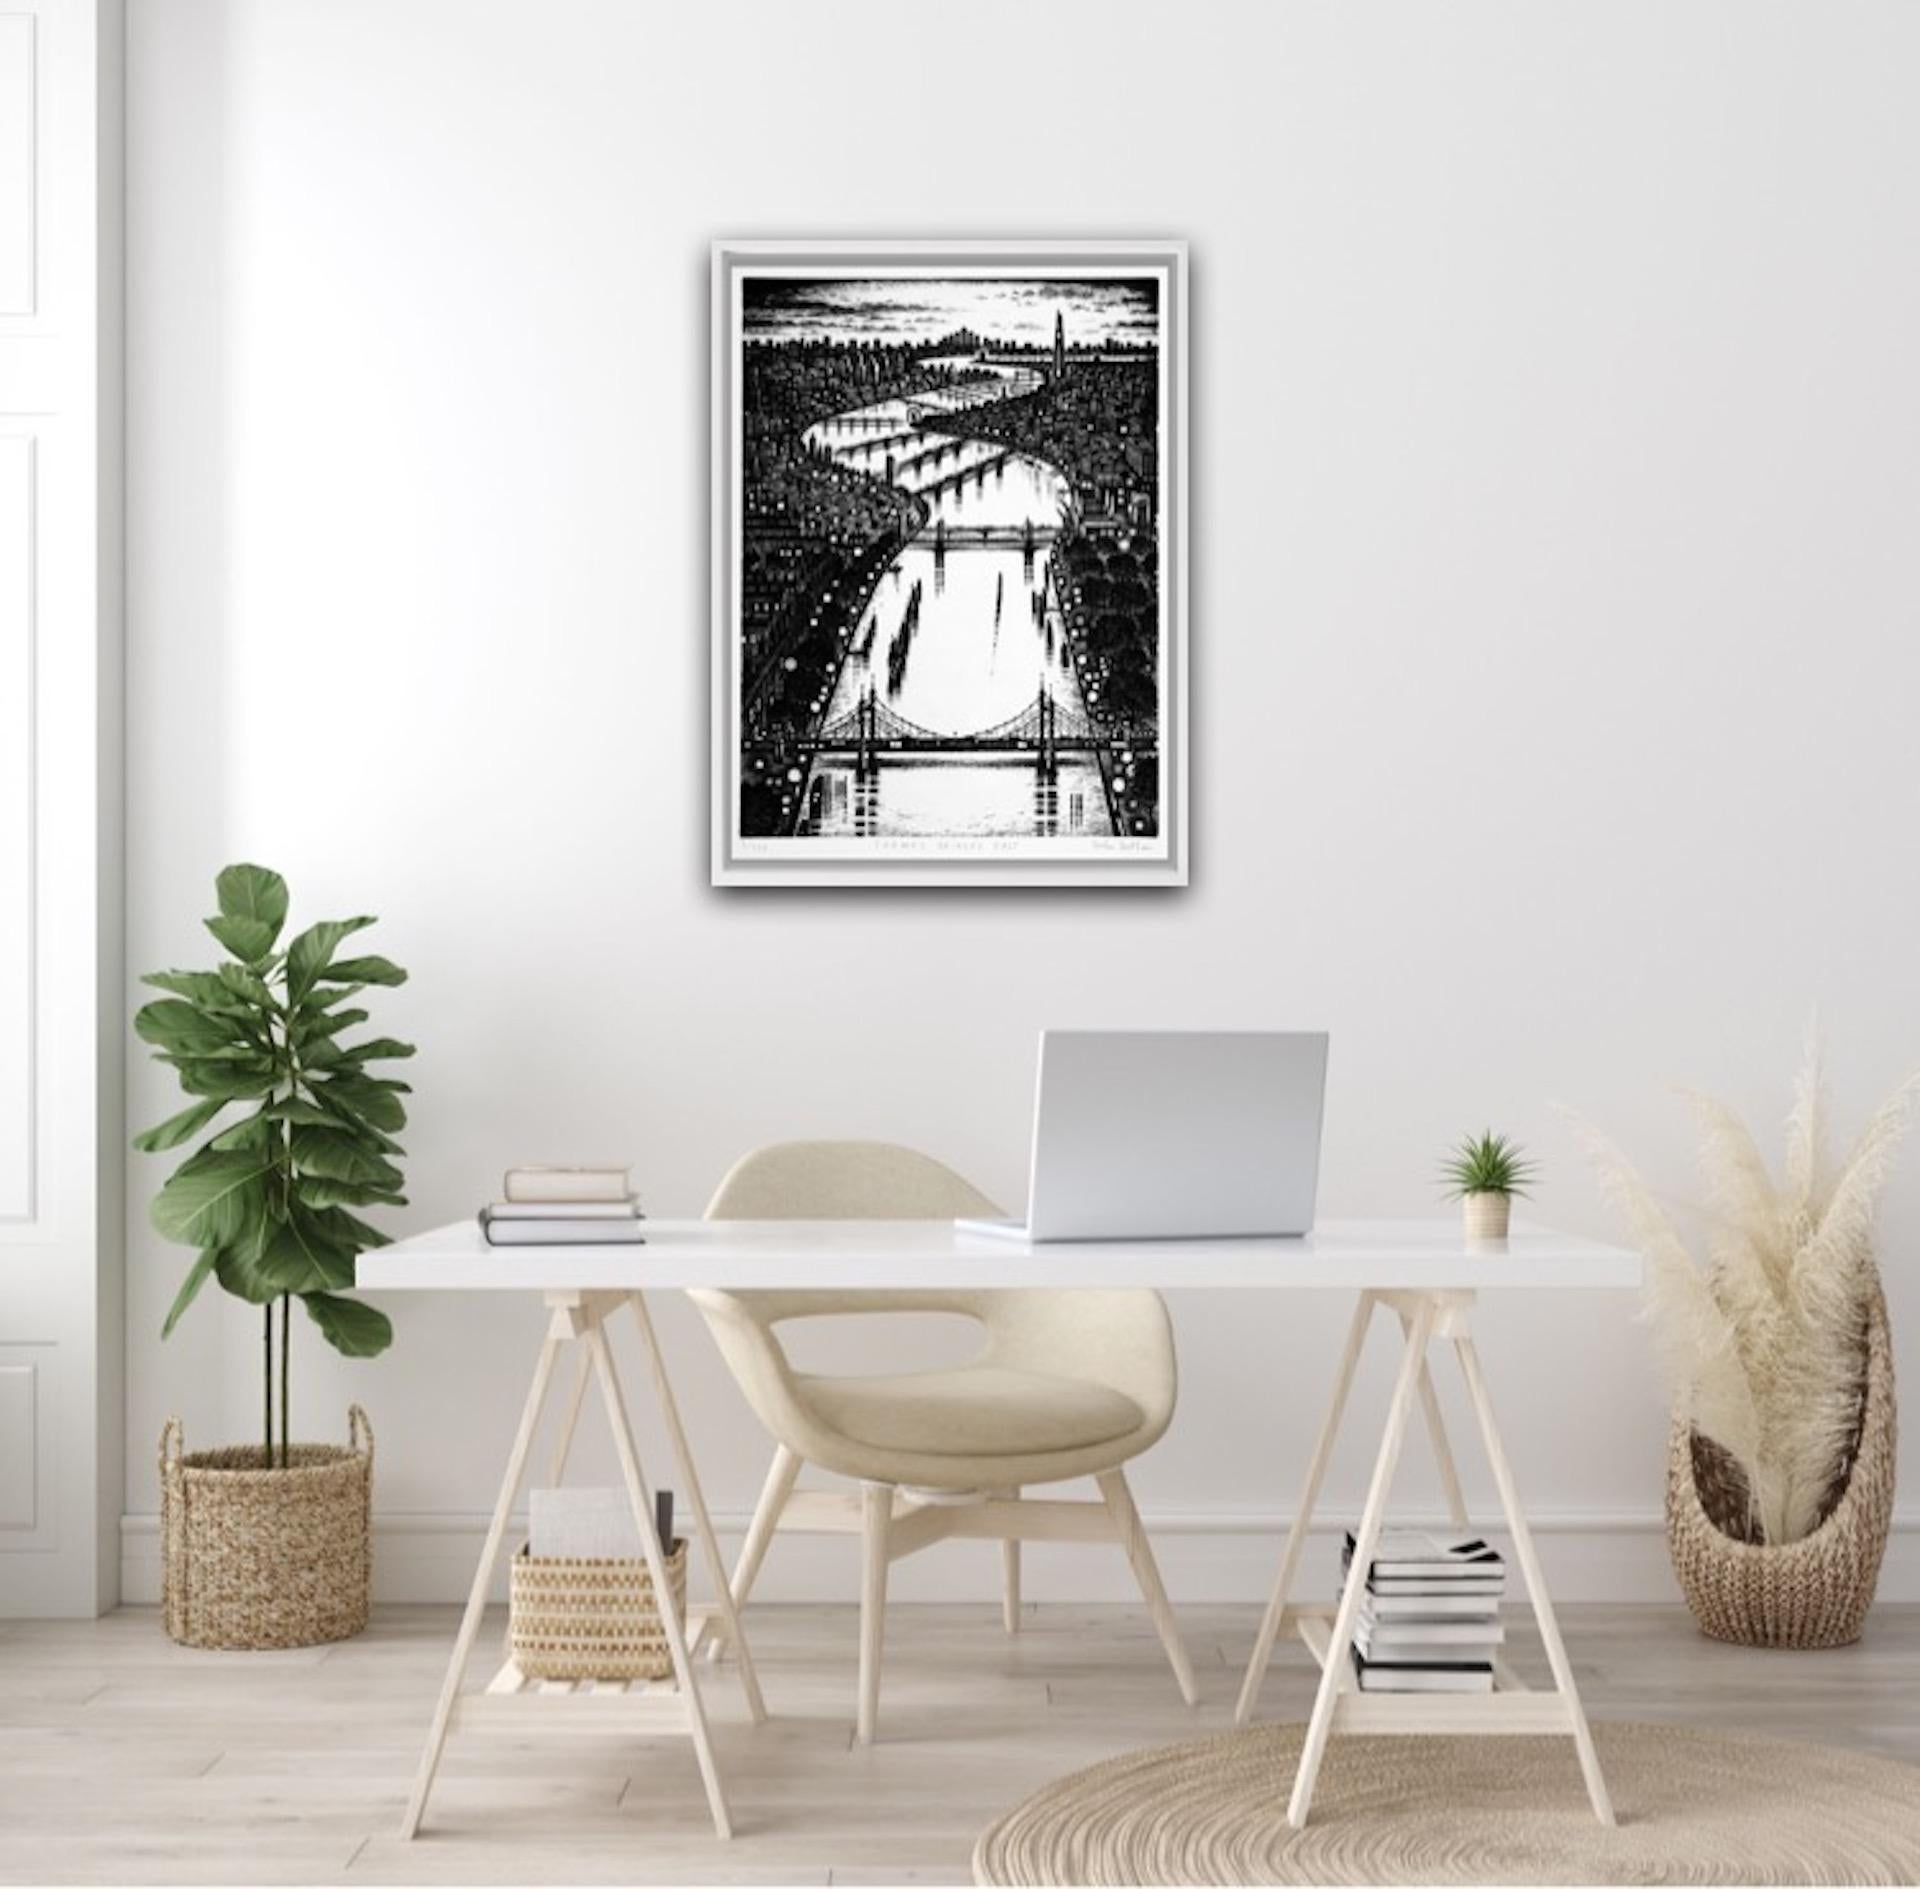 John Duffin
Thames Bridges East
Limited Edition Cityscape Etching
Edition of 150
Image Size: H 61cm x W 46cm
Paper Size: H 76cm x W 56cm x D 0.1cm
Sold Unframed
Signed and numbered by the artist
Please note that in situ images are purely an